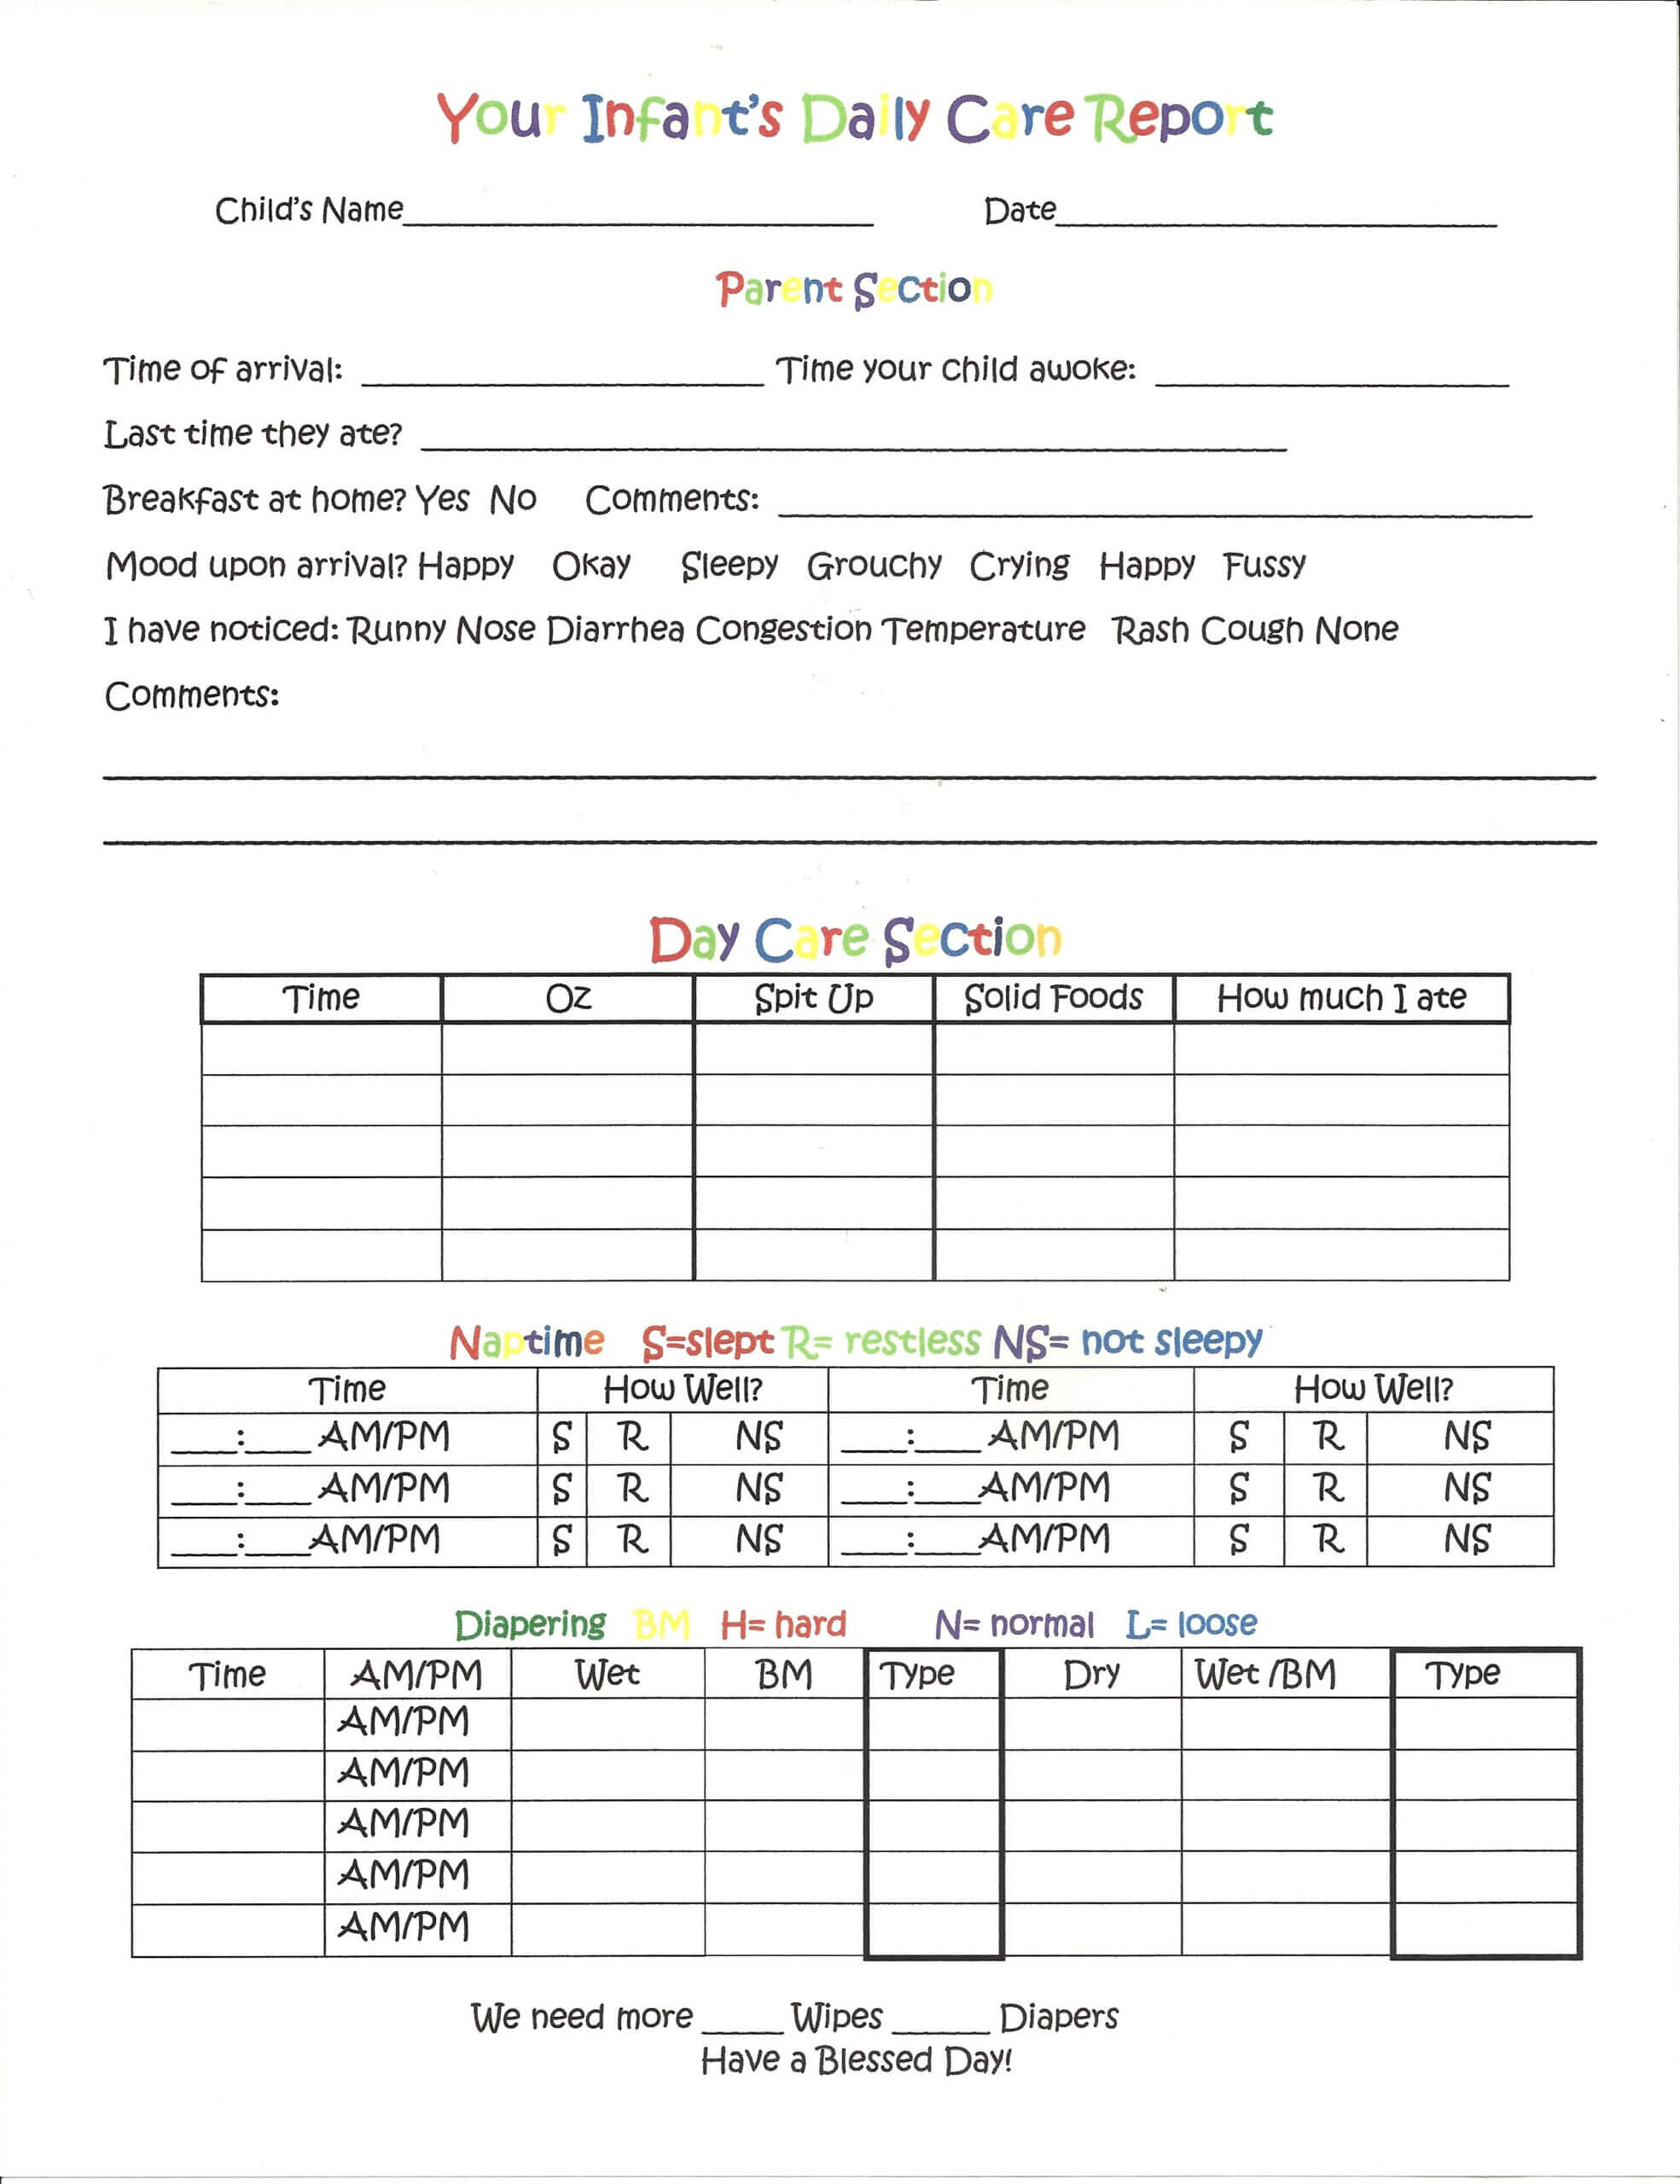 Daily Report For Infants. That I Put Together. | Infant In Daycare Infant Daily Report Template